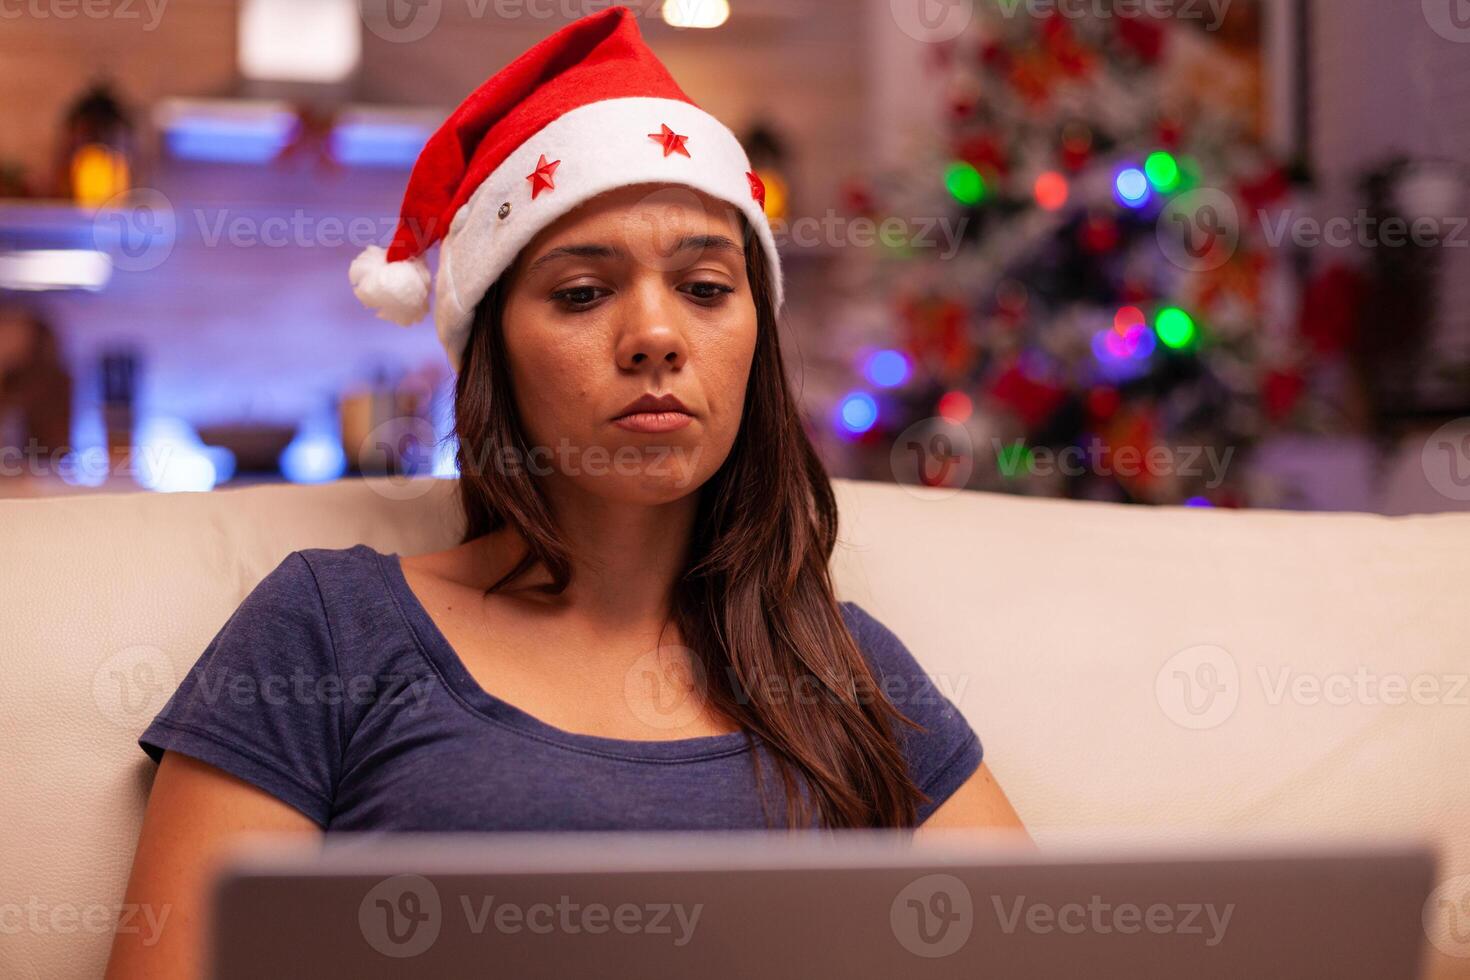 Woman looking at laptop screen reading business email during christmas holiday resting comfortable on couch in xmas decorated kitchen. Caucasian female browsing on social media. Winter season photo